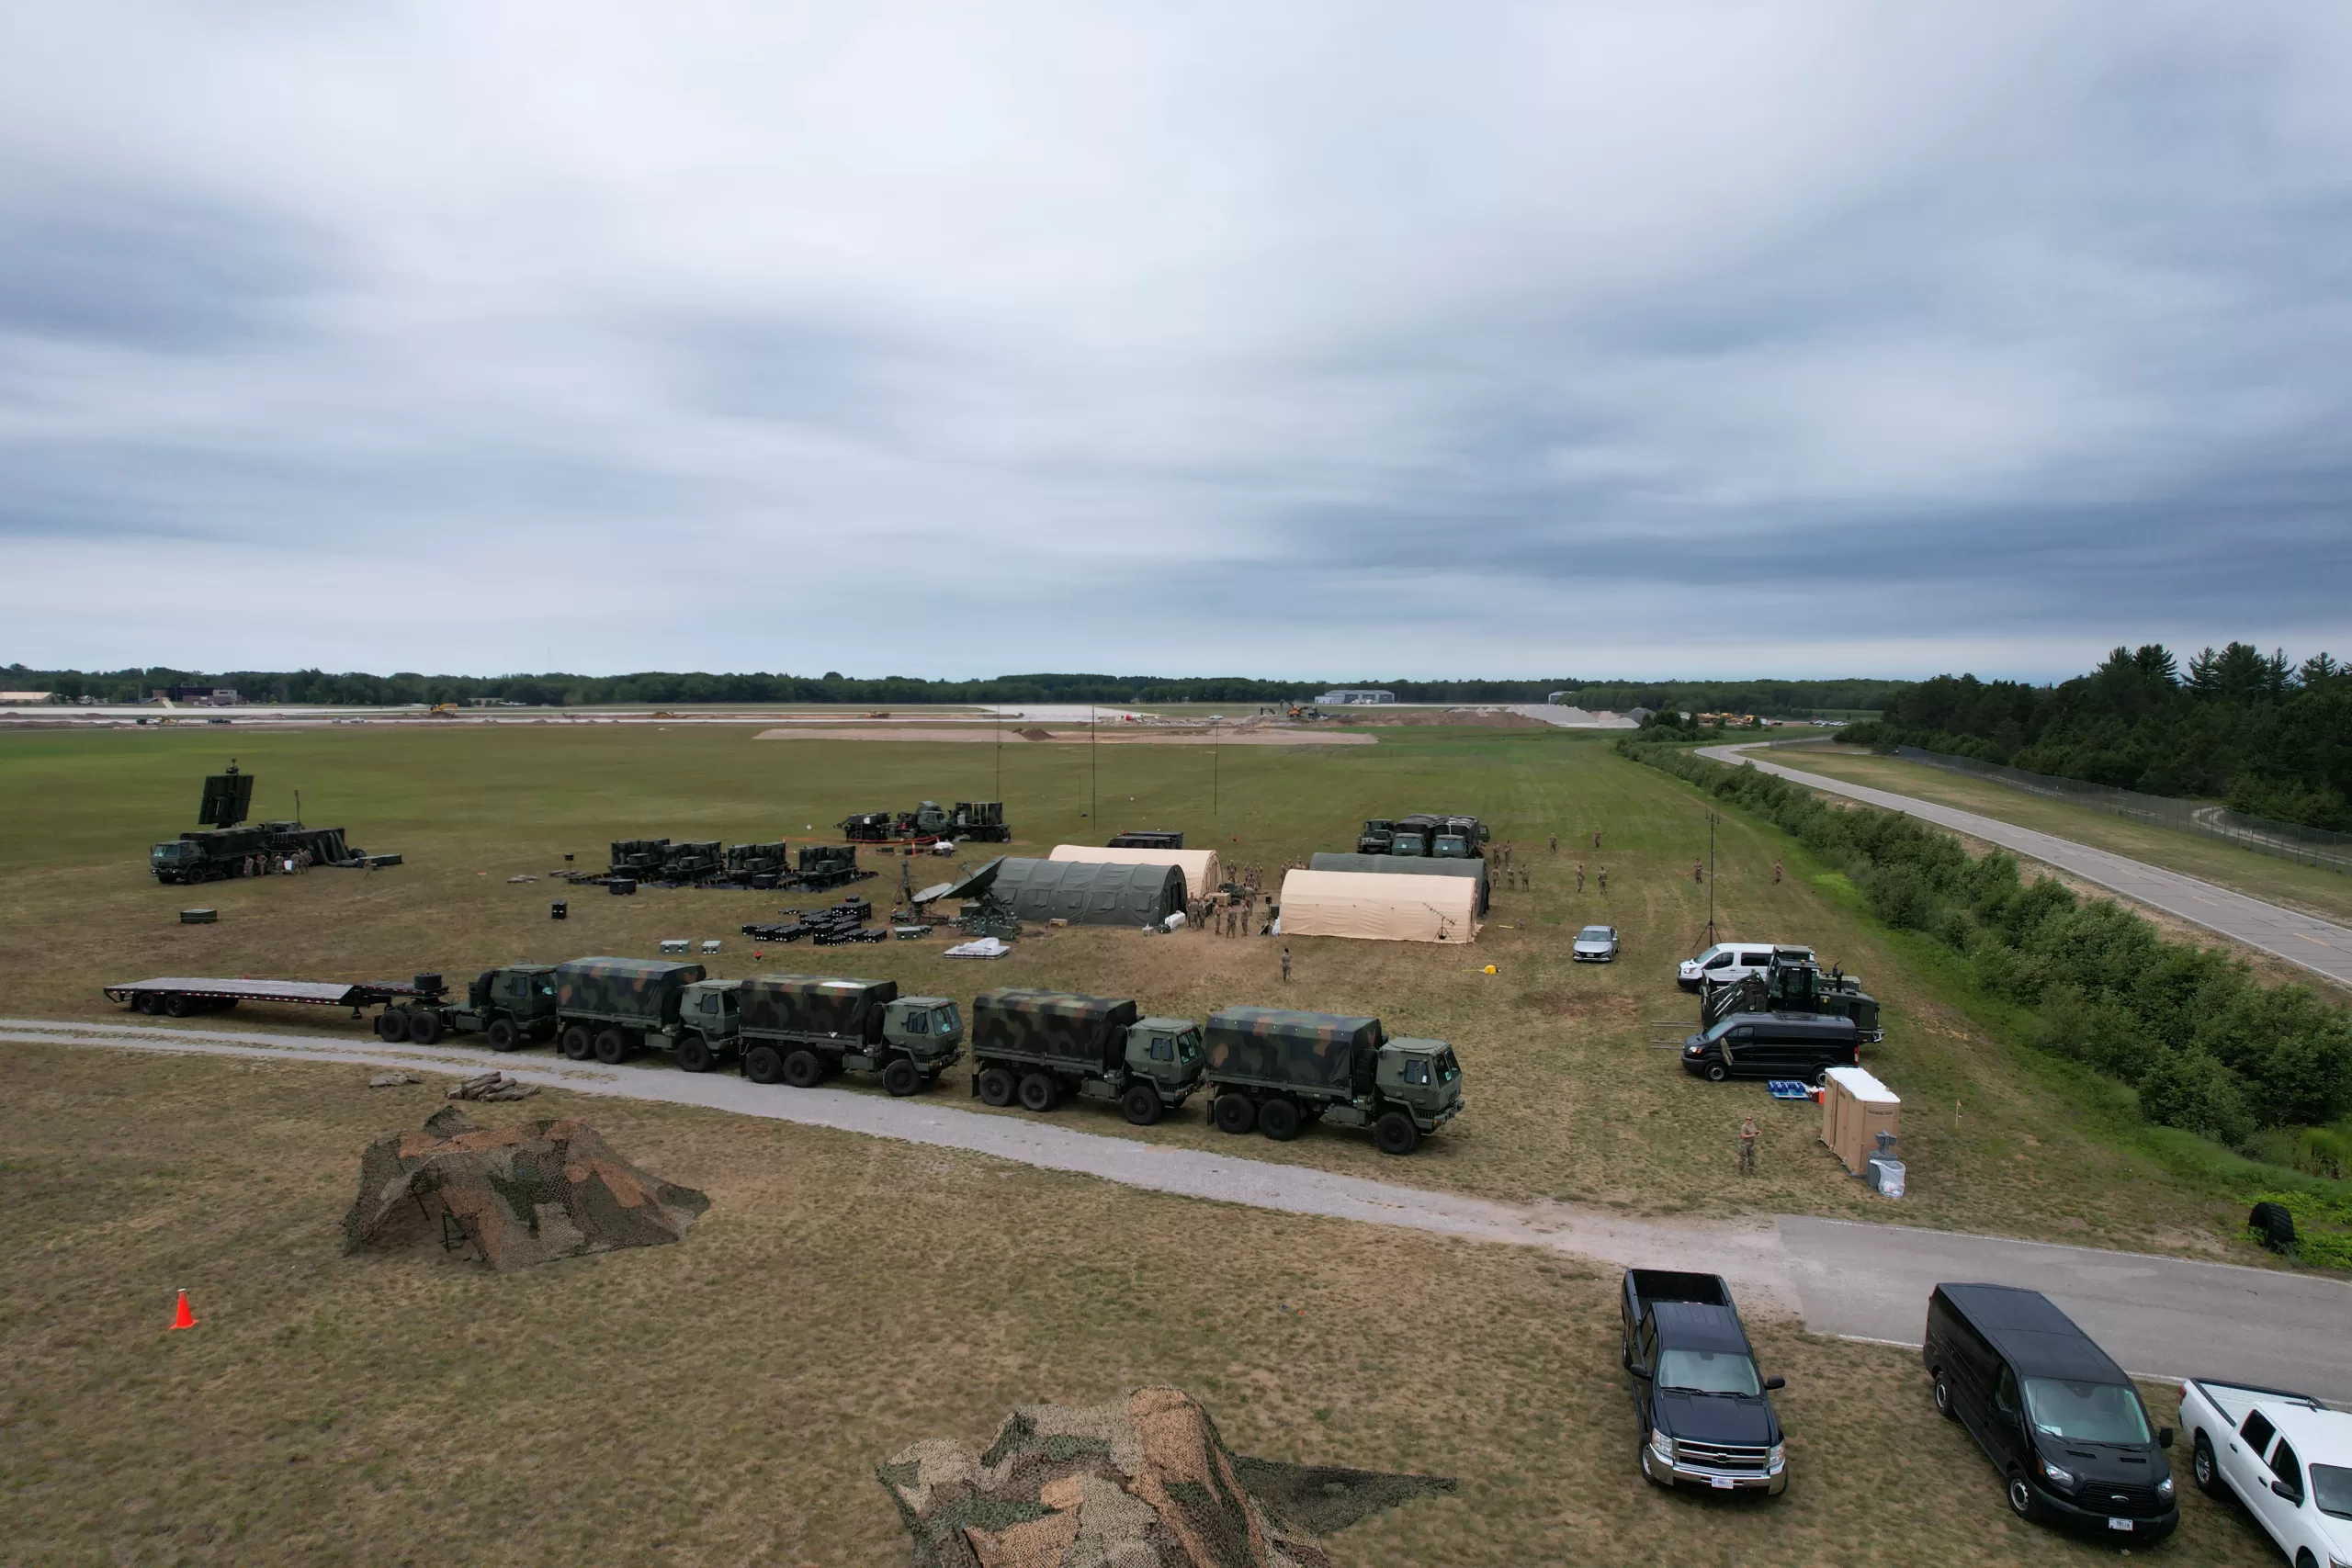 The main operating base of the Wisconsin Air National Guard’s 128th Air Control Squadron at Alpena Combat Readiness Training Center, Mich., as seen July 14. The 128th recently spent two weeks training on new forward operating location tactics and equipment, which improves the unit’s overall readiness for a potential near-peer conflict. Wisconsin National Guard photo